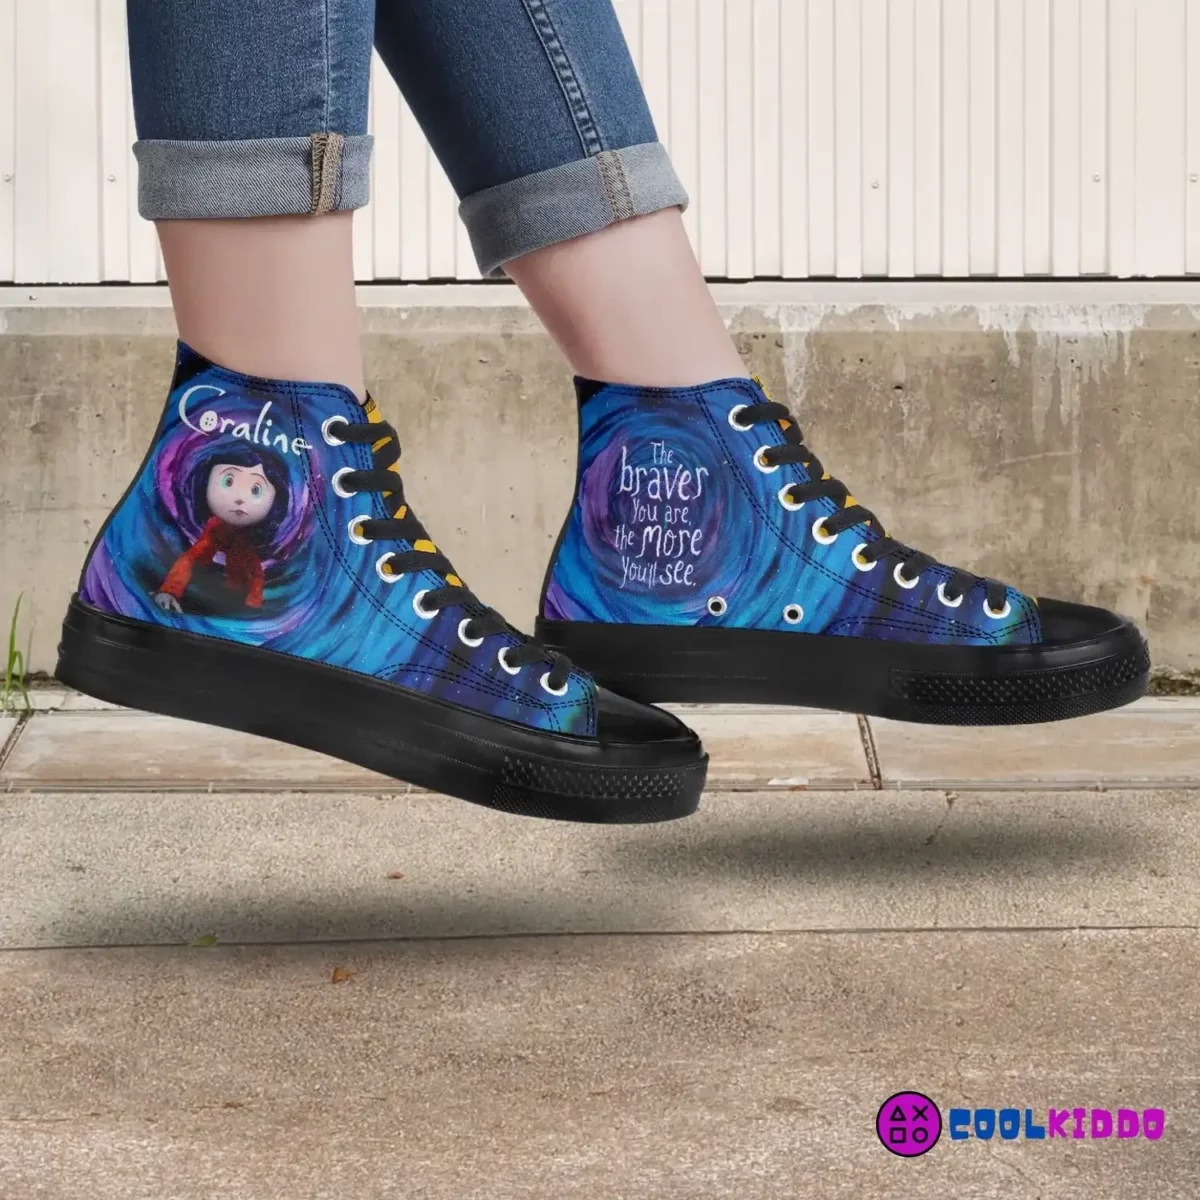 Custom Coraline High-Top Canvas Sneakers, Tim Burton’s animated movie Inspired Casual Shoes for Youth/Adults Cool Kiddo 24